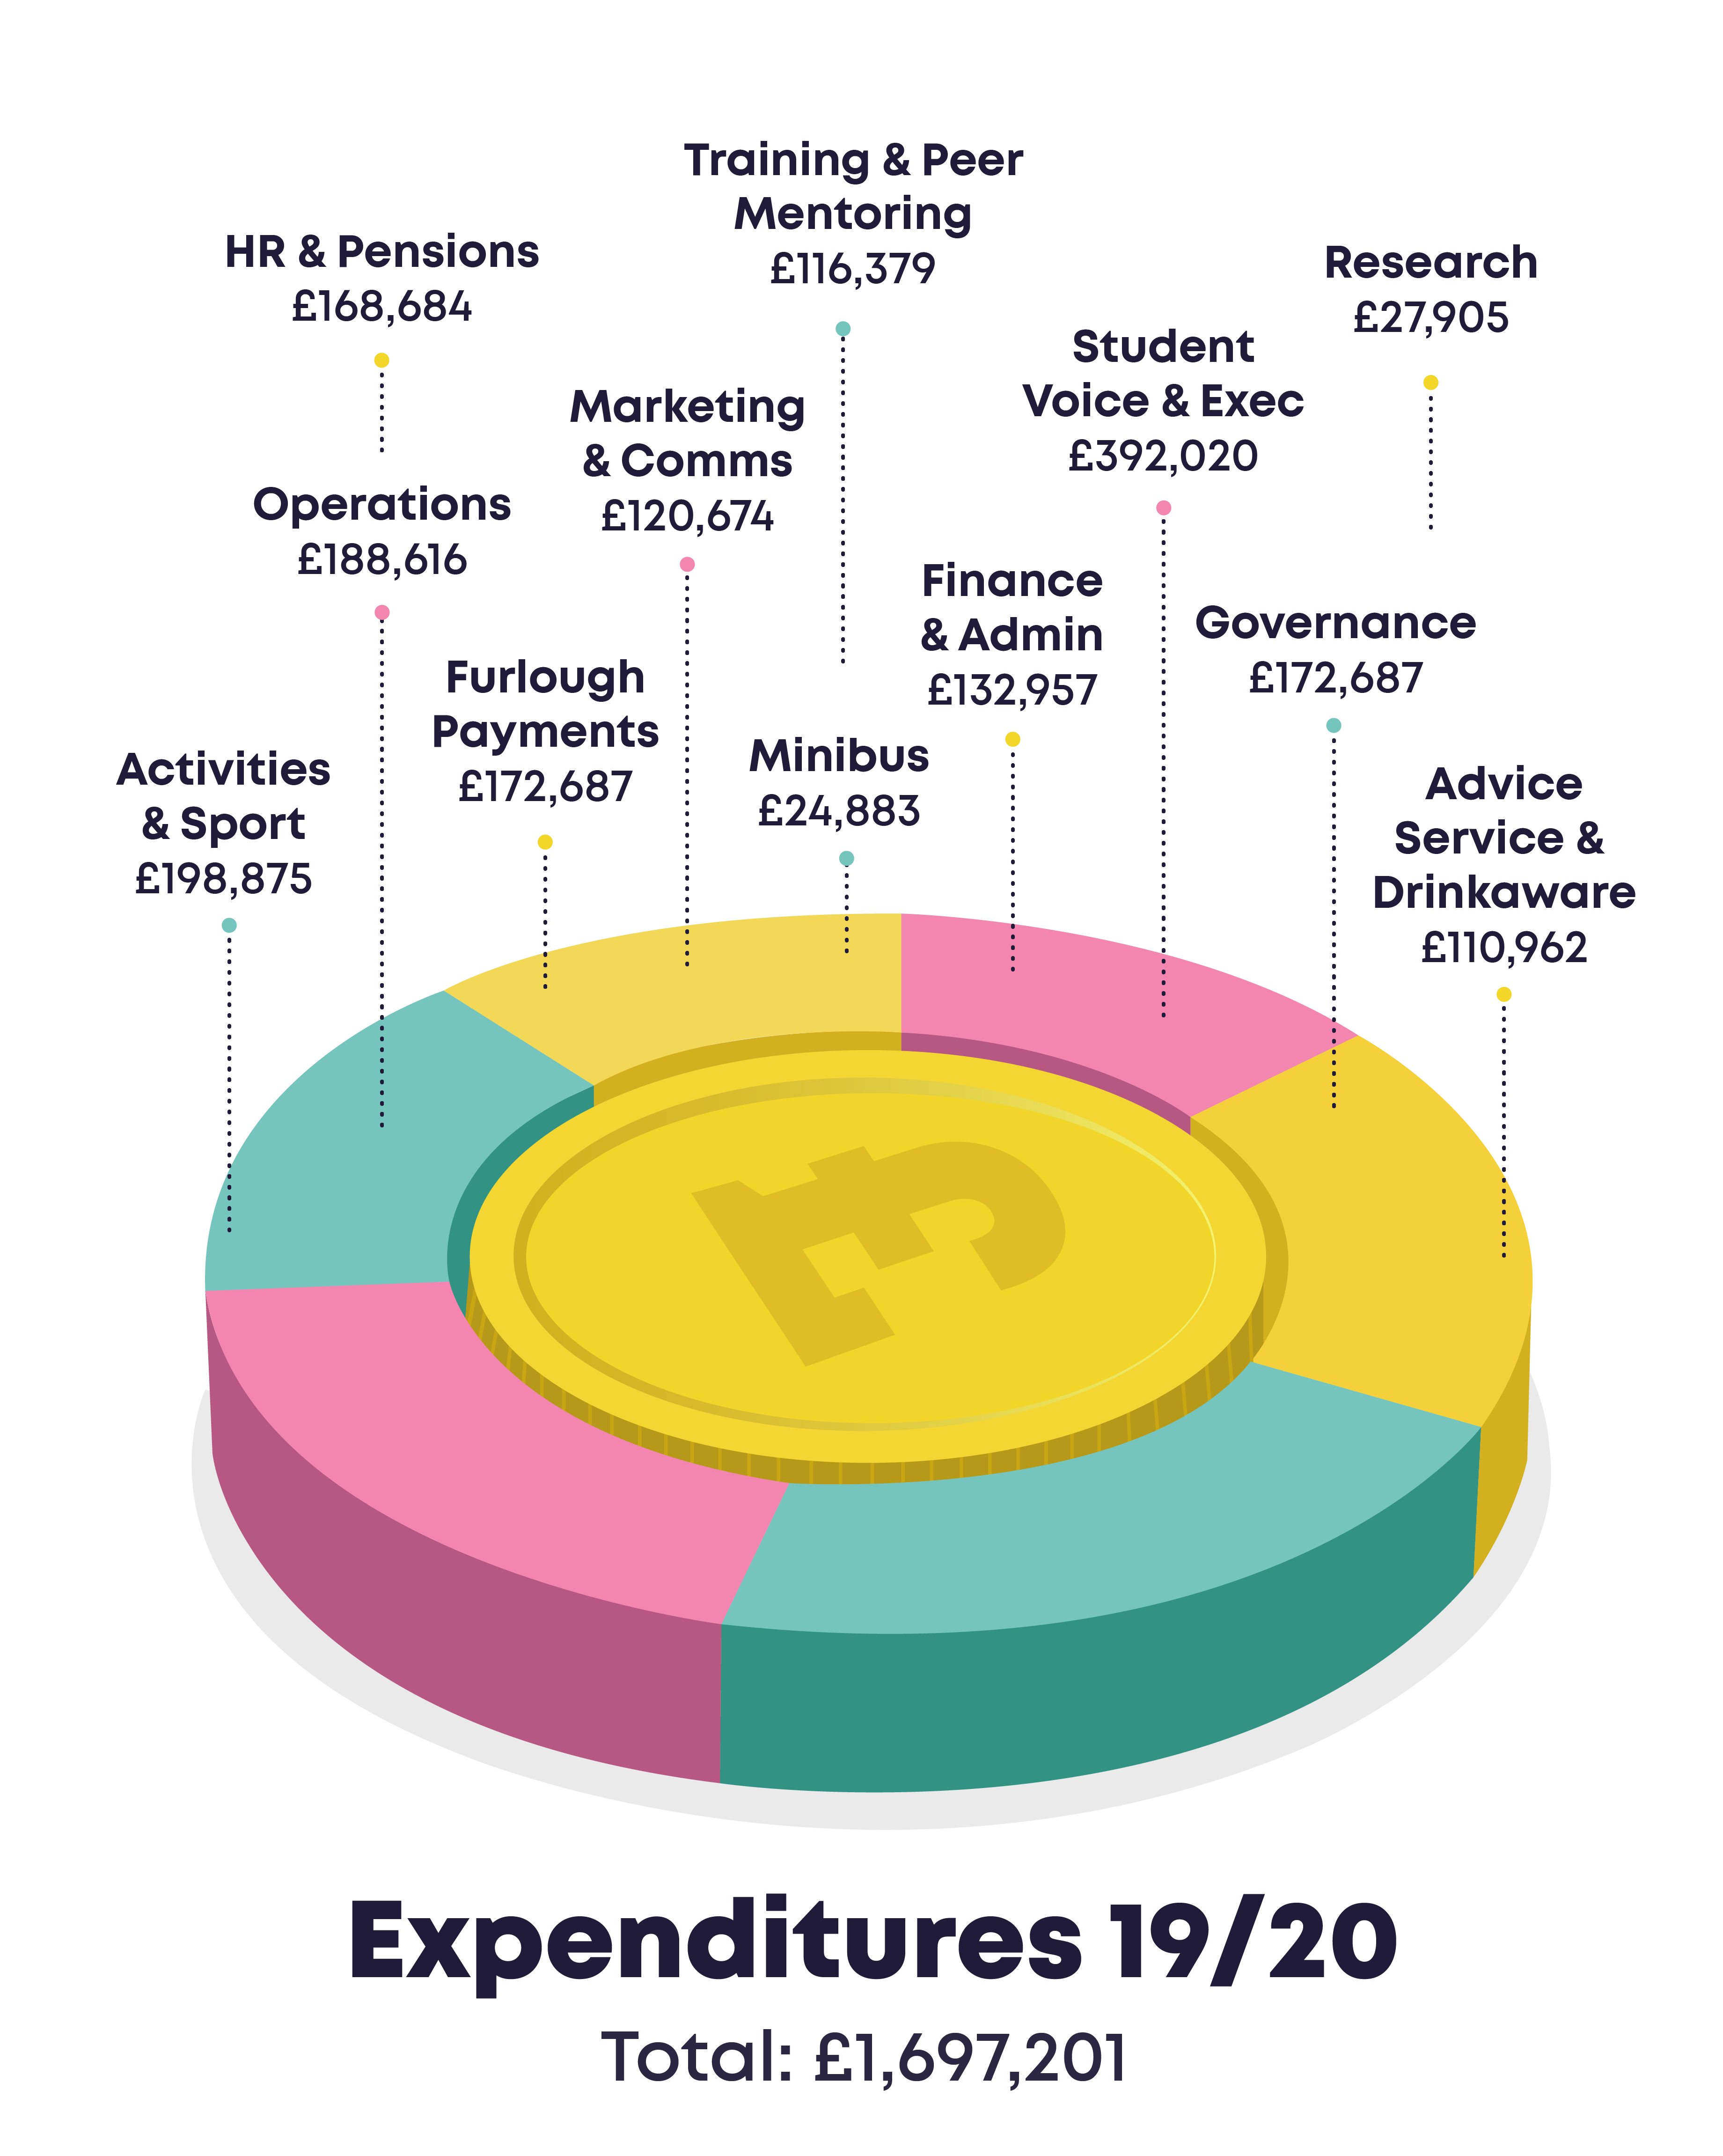 Expenditures 19/20 - Activities & Sport £198,875 - HR & Pensions £168,684 - Operations £188,616 - Furlough Payments £172,687 - Marketing and Comms £120,687 - Training and Peer Mentoring £116,379 - Finance and Admin £132,957 - Student Voice and Exec £392,020 - Governance £172, 687 - Research £27,905 - Advice Service and Drinkaware £110,962 - Total: £1,697,201